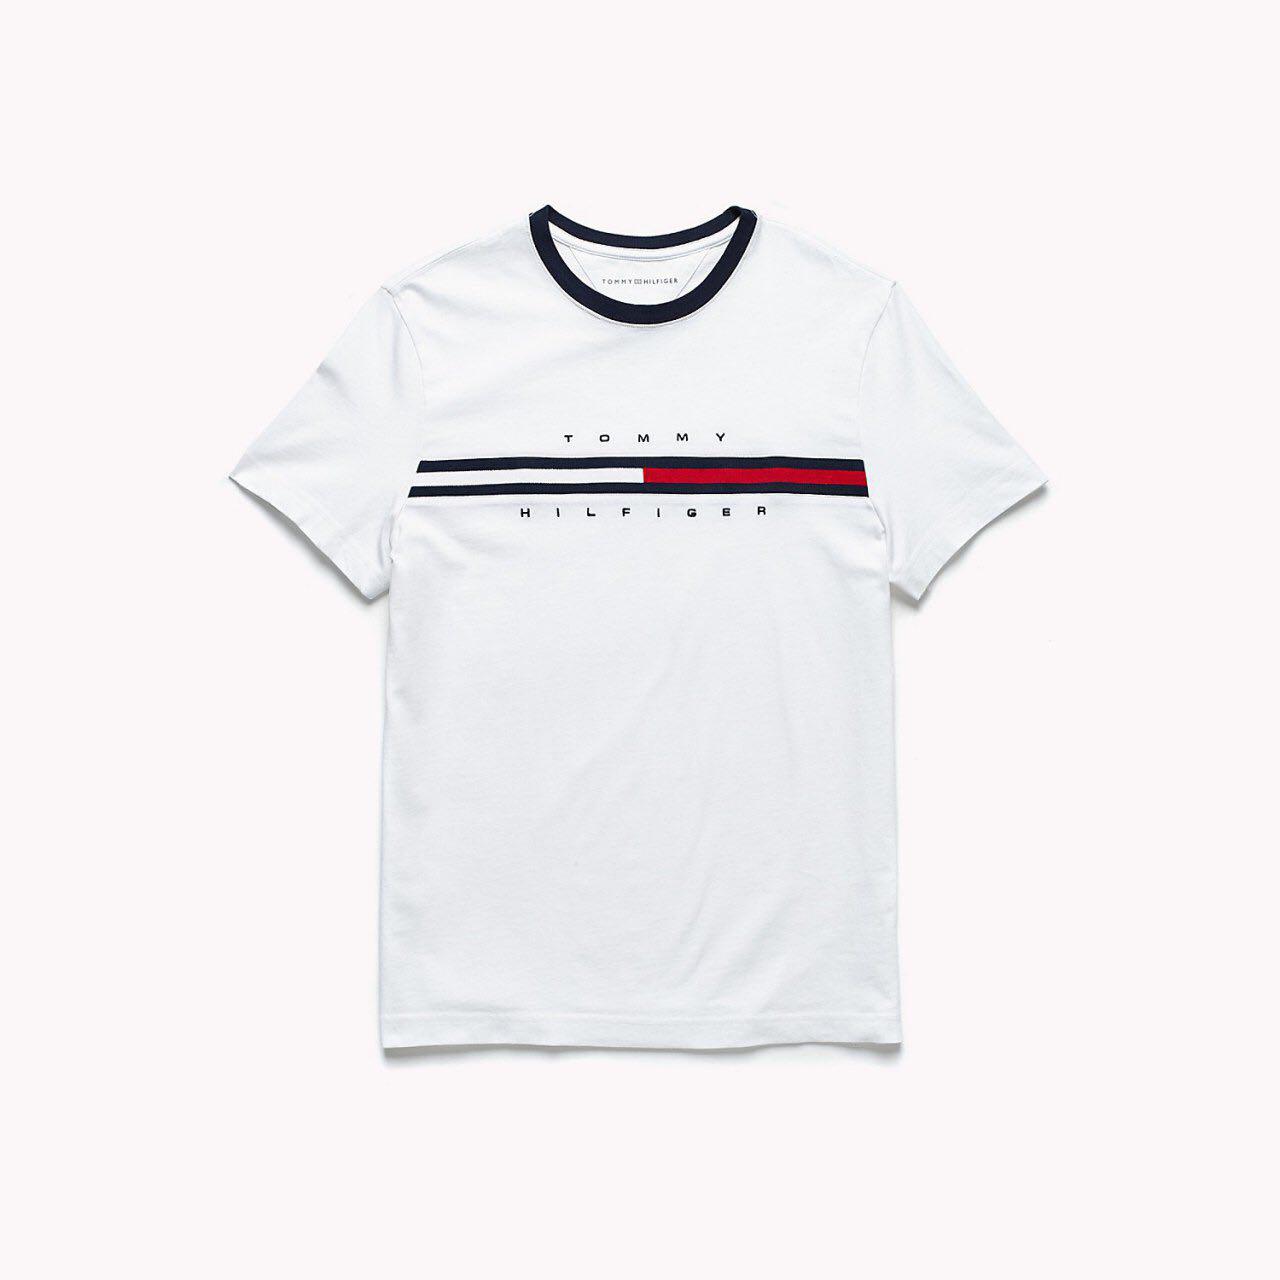 Tommy Hilfiger Men's White T-Shirt - NY Outlet Brands in Dubai